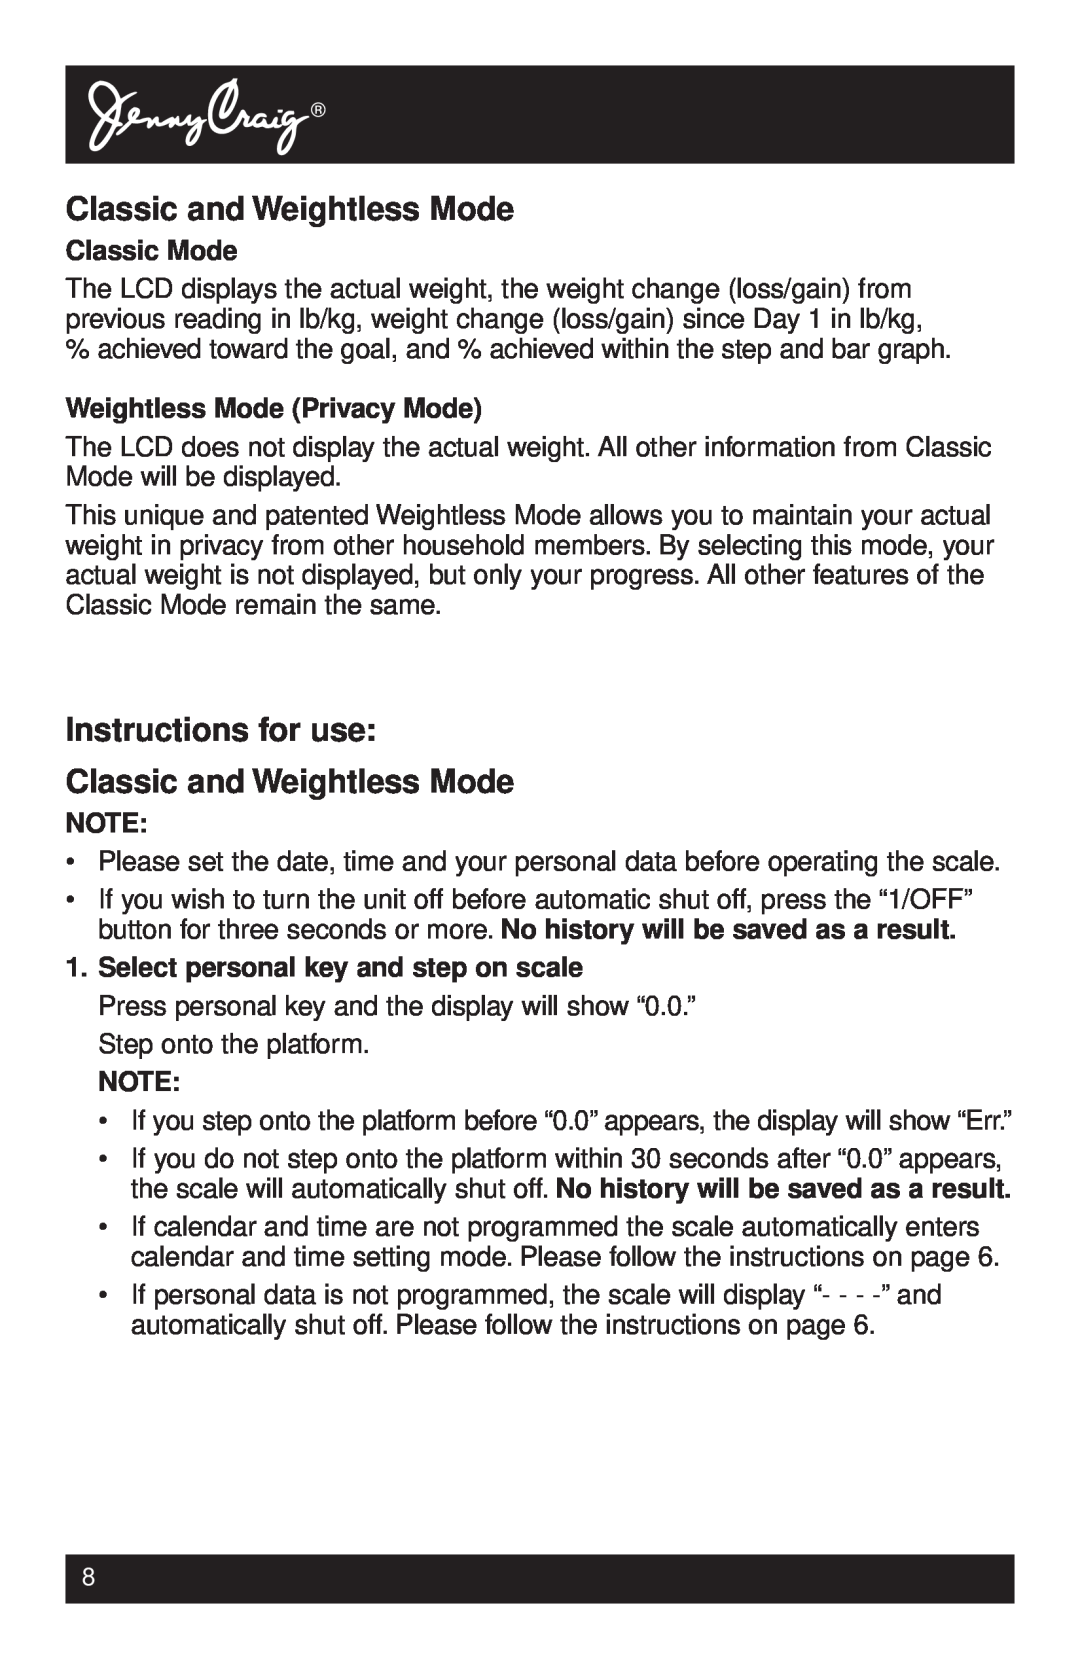 Tanita HD-340 Instructions for use Classic and Weightless Mode, Classic Mode, Weightless Mode Privacy Mode 